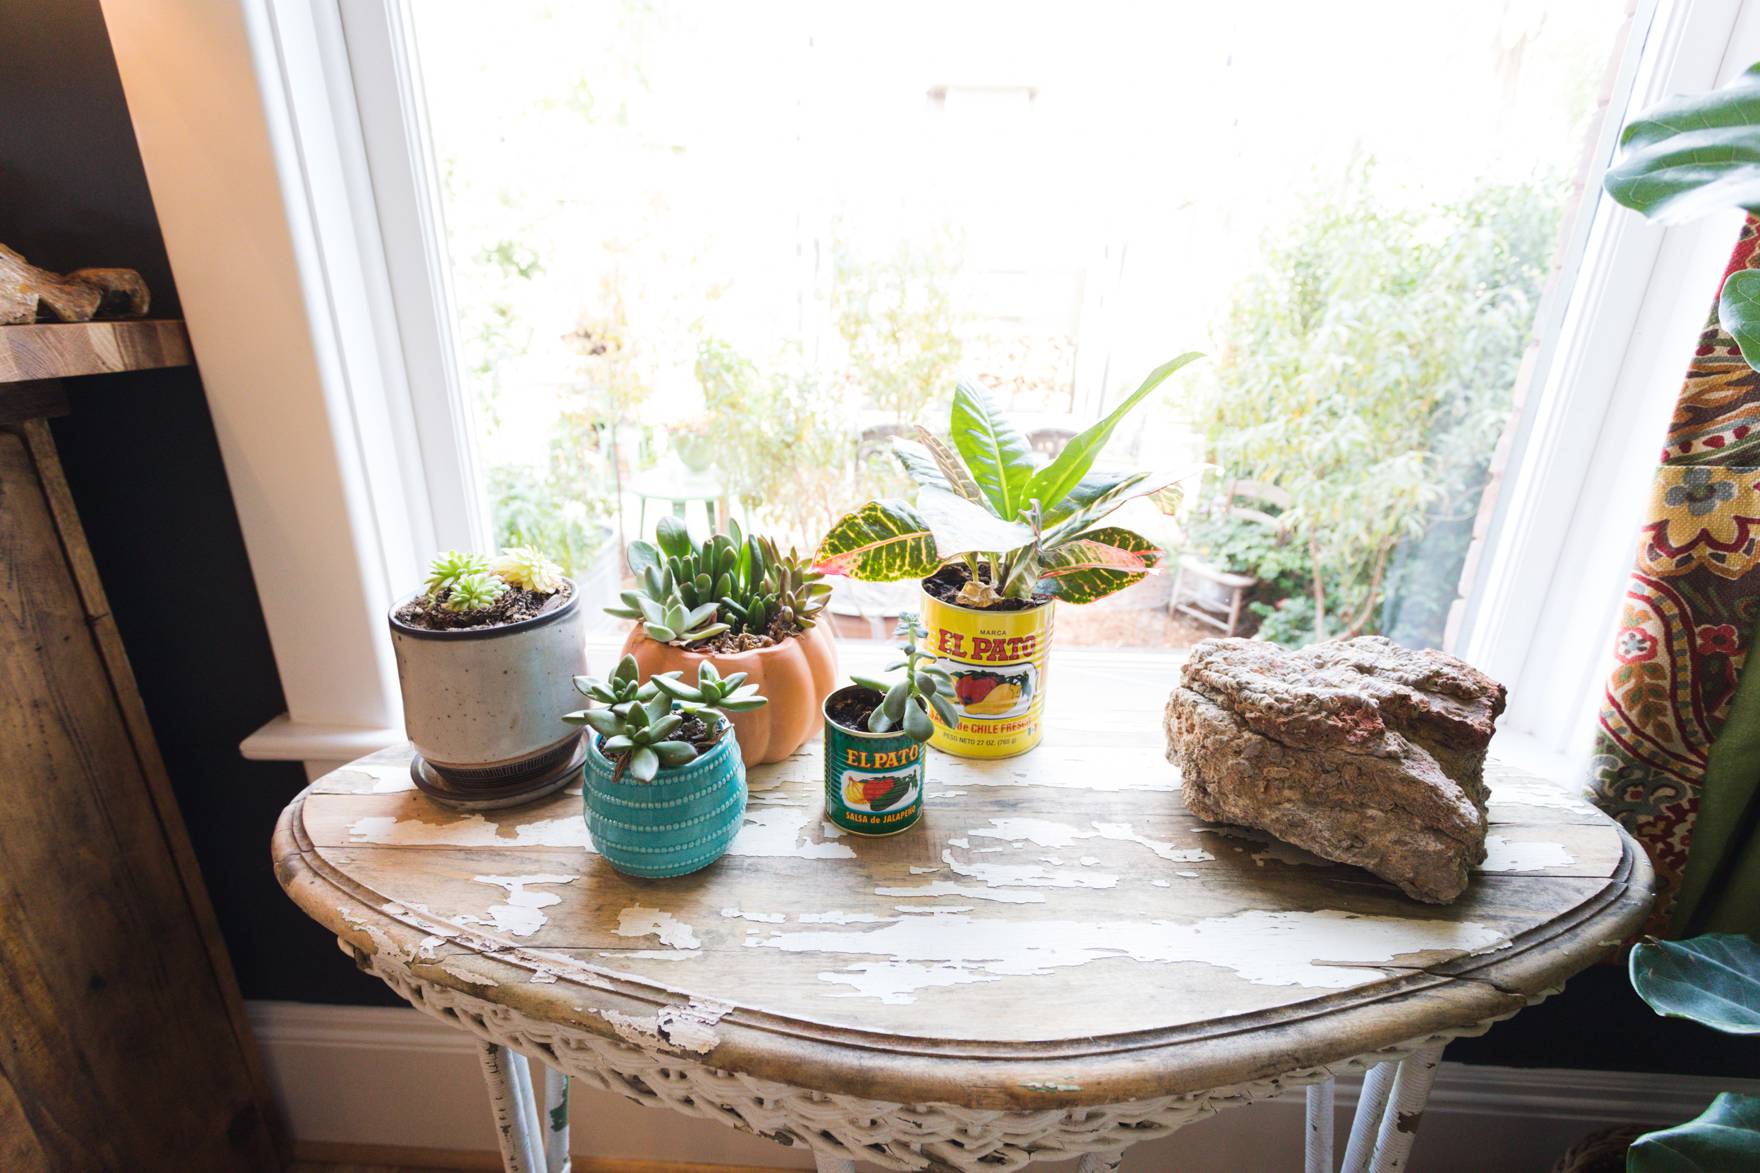 Home Tour of Boho Farm and Home in Downtown Phoenix - cottage brick style home from 1903 living room to kitchen details succulents in old sauce jars